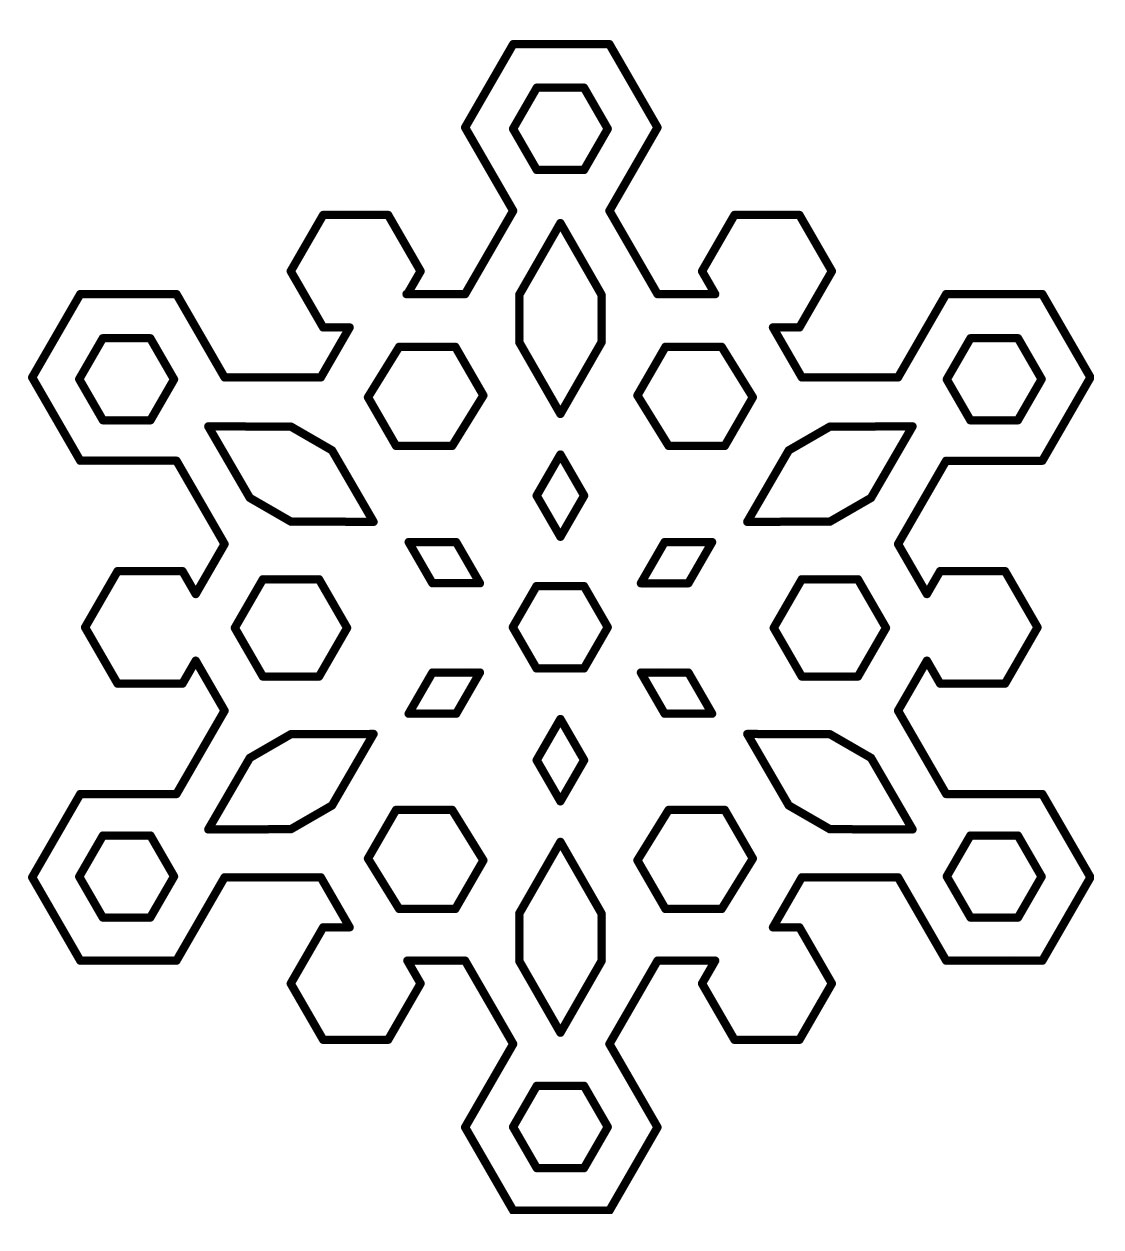 Clipart Is In Black And White While Some Of The Snowflake Clipart